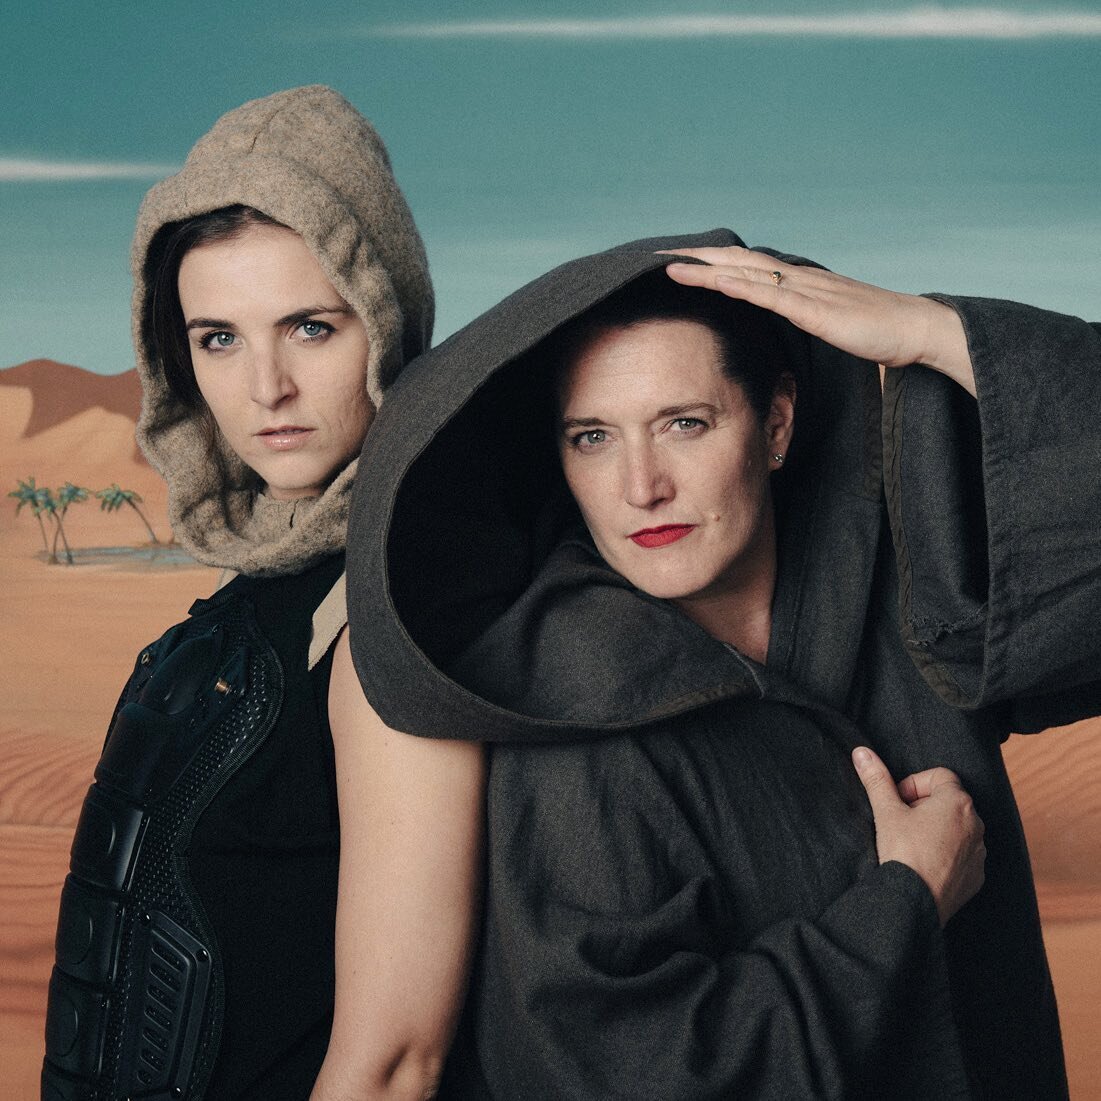 To help celebrate the wonderful redevelopment of BAFTA&rsquo;s iconic HQ we hosted a cinematic desert themed photo shoot. So much fun and world class acting from all who took part. 
#bafta195 #195picadiilly #immersive #photobooth #dune #desert